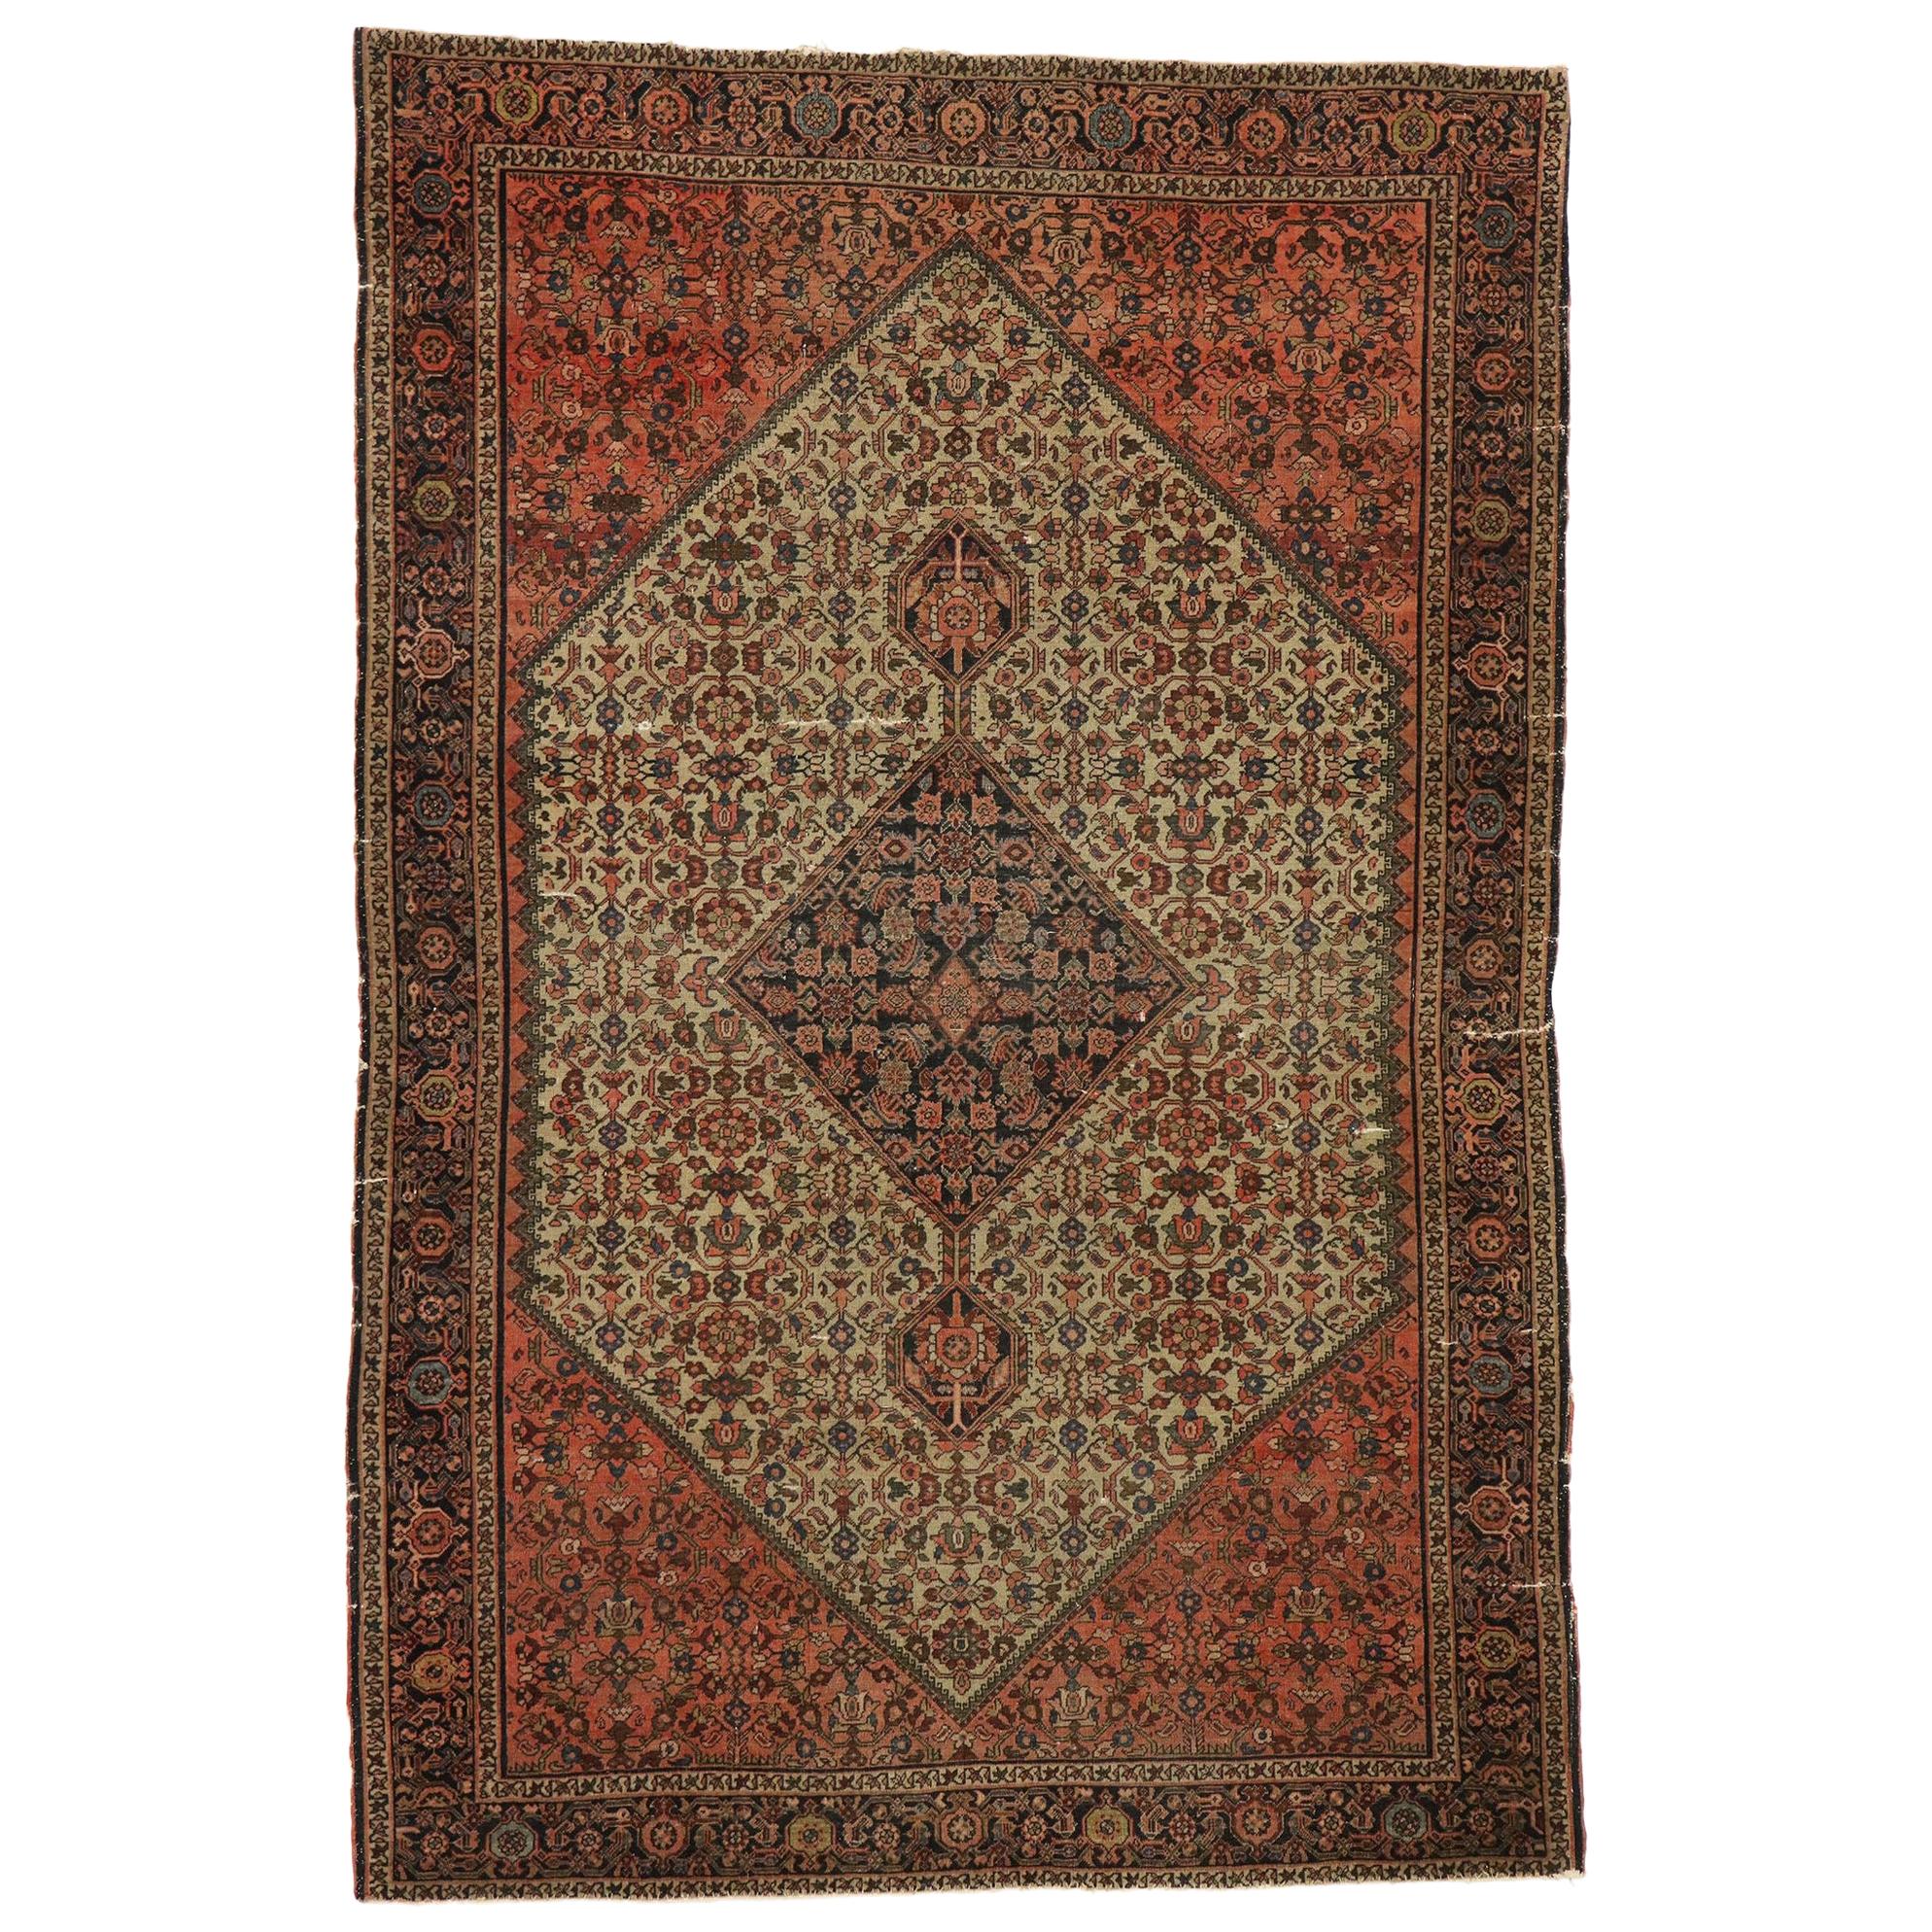 Distressed Antique Persian Farahan Rug withy Rustic Craftsman Style For Sale